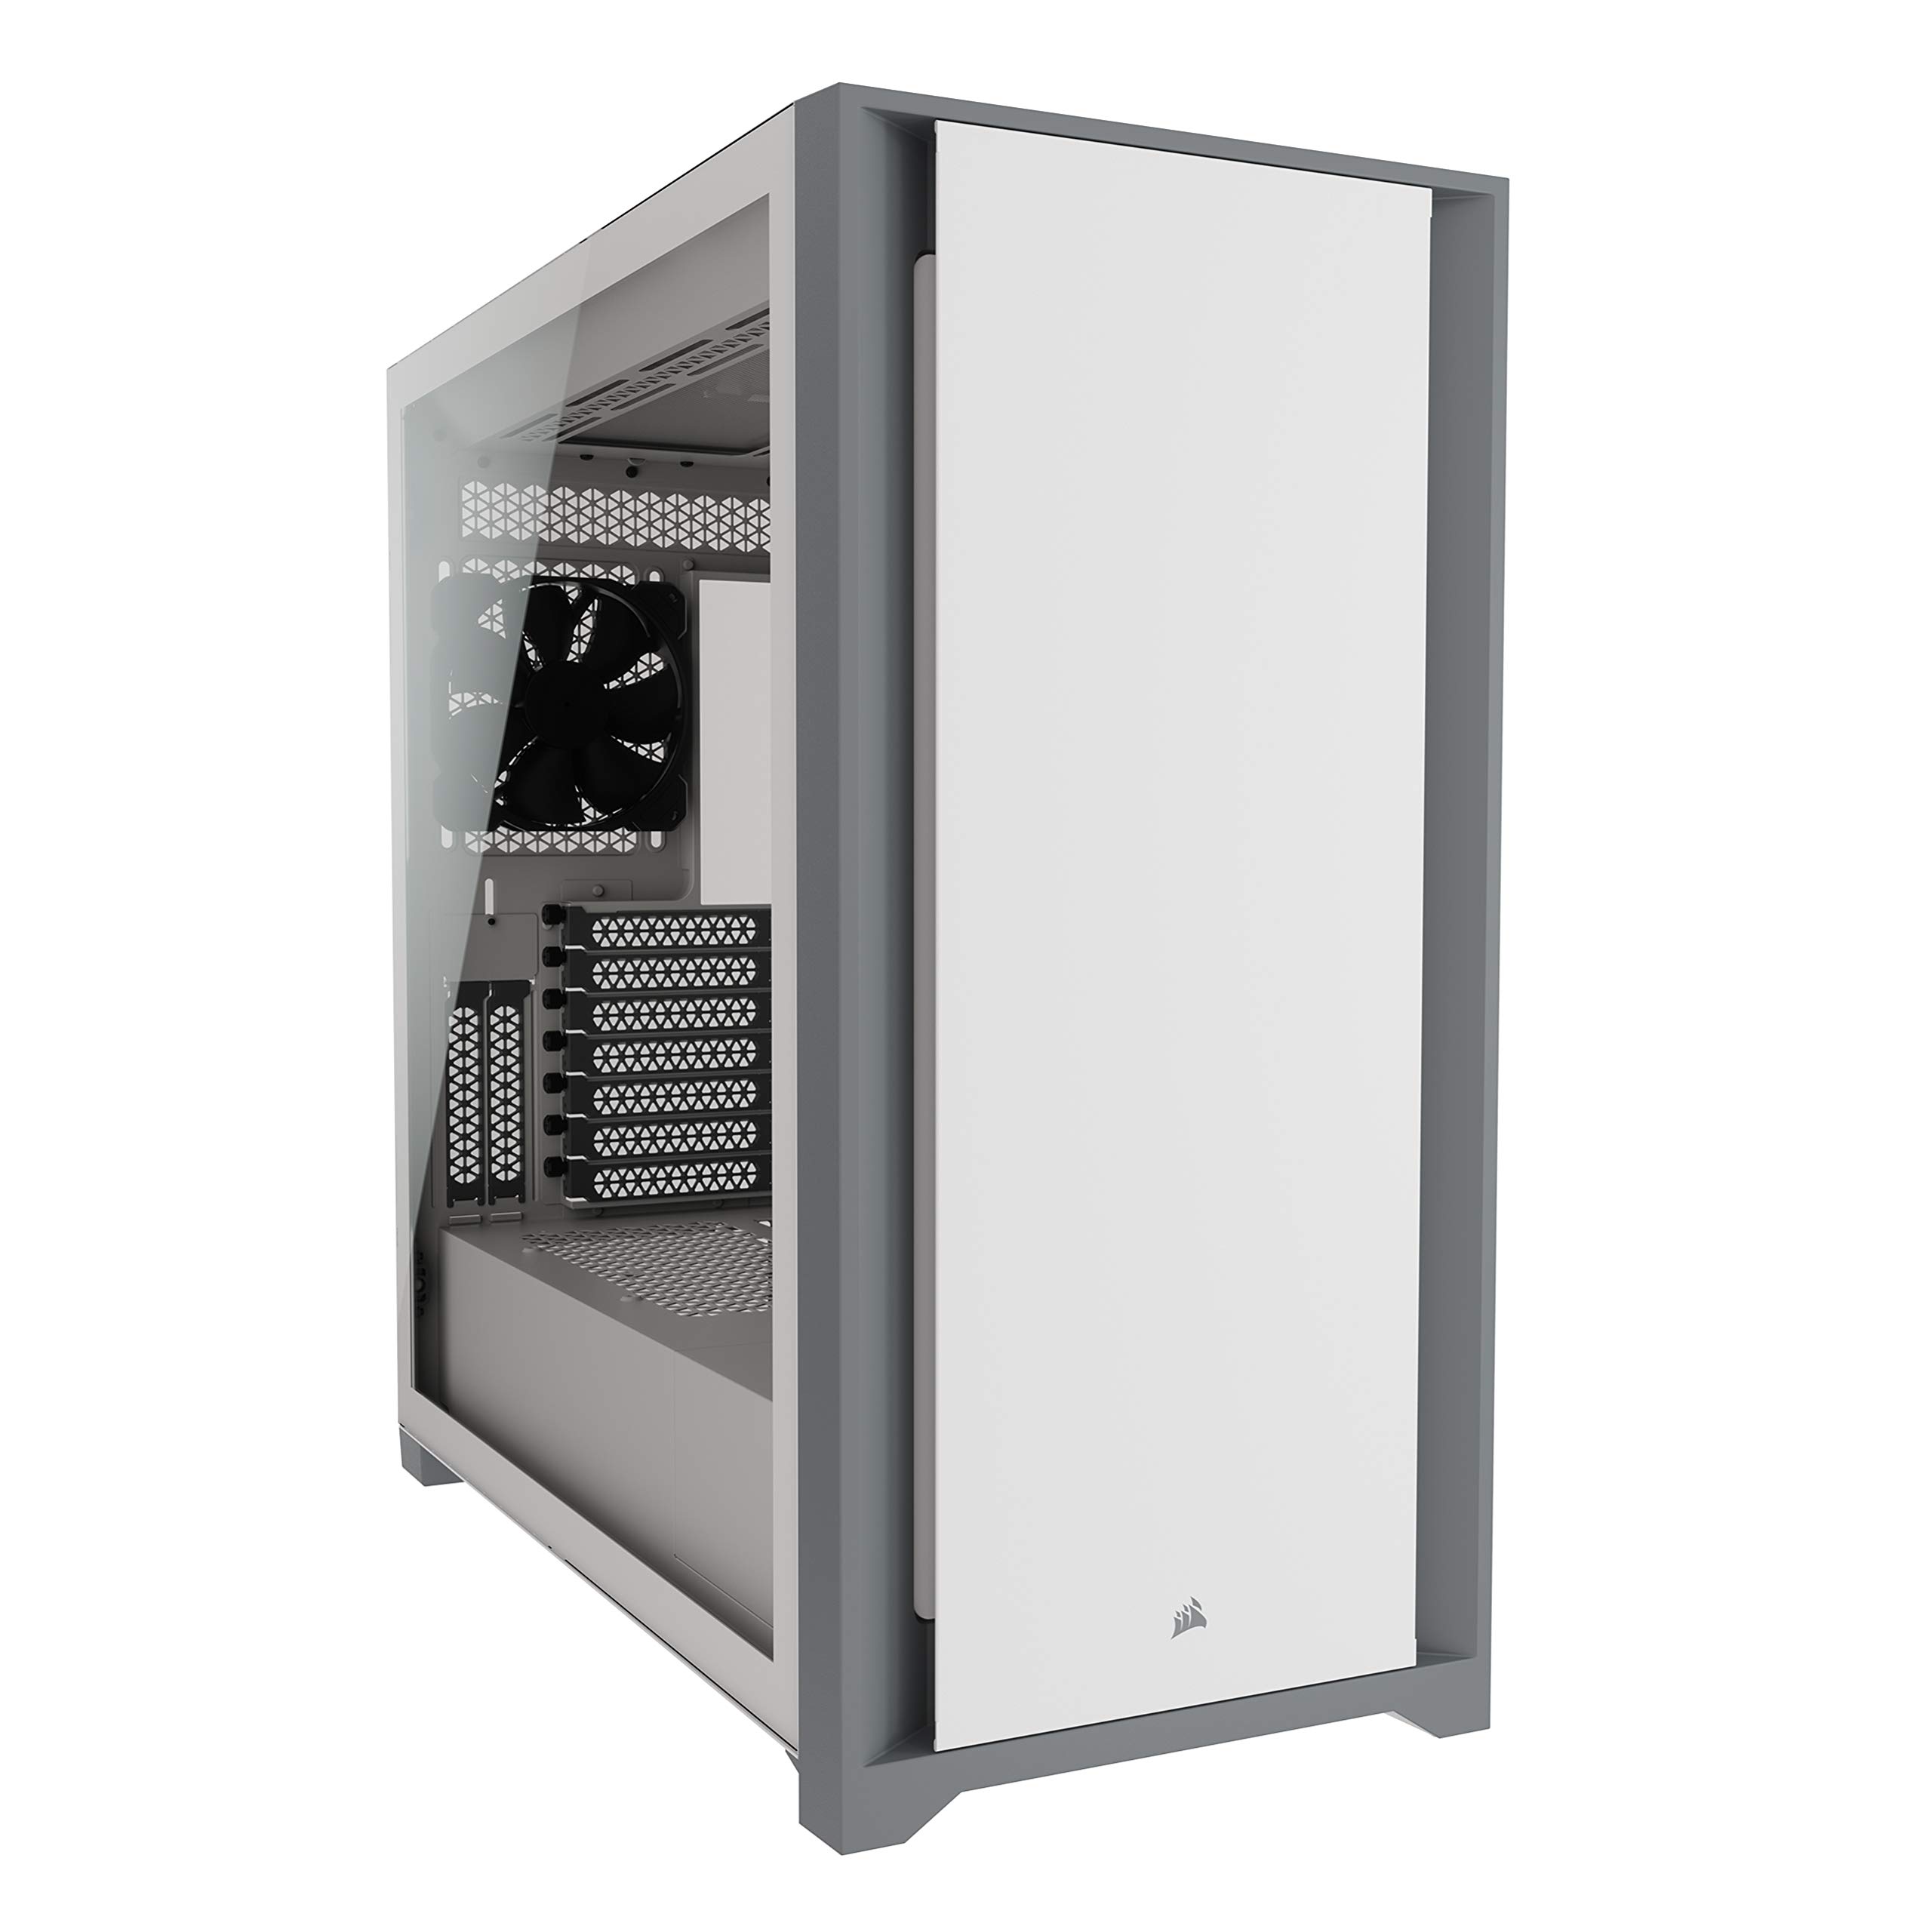 Corsair 5000D Tempered Glass Mid-Tower ATX PC Case White (Prime Exclusive) - $64.99